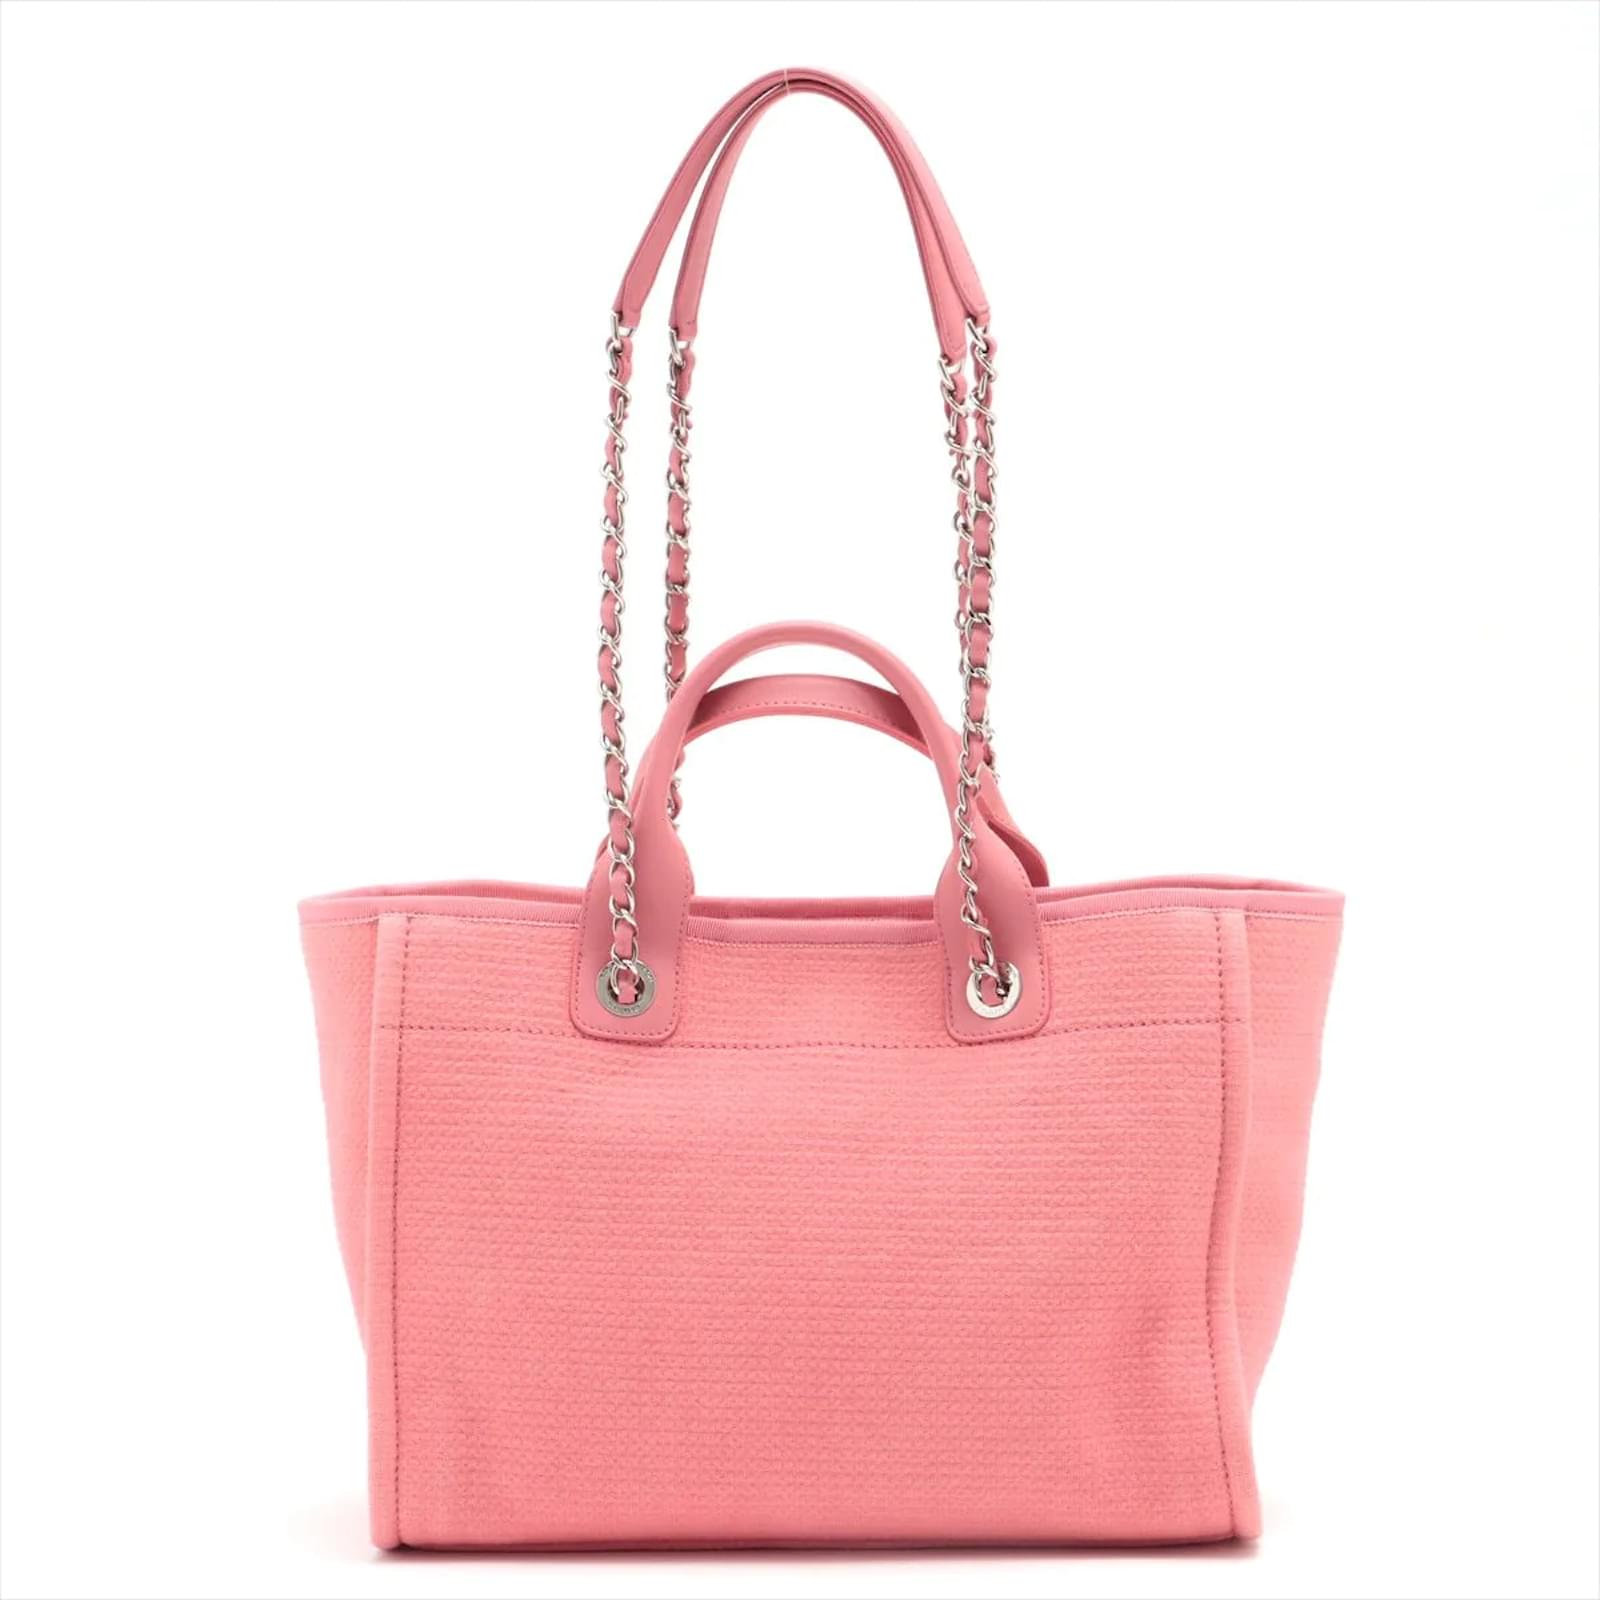 pink chanel deauville bag